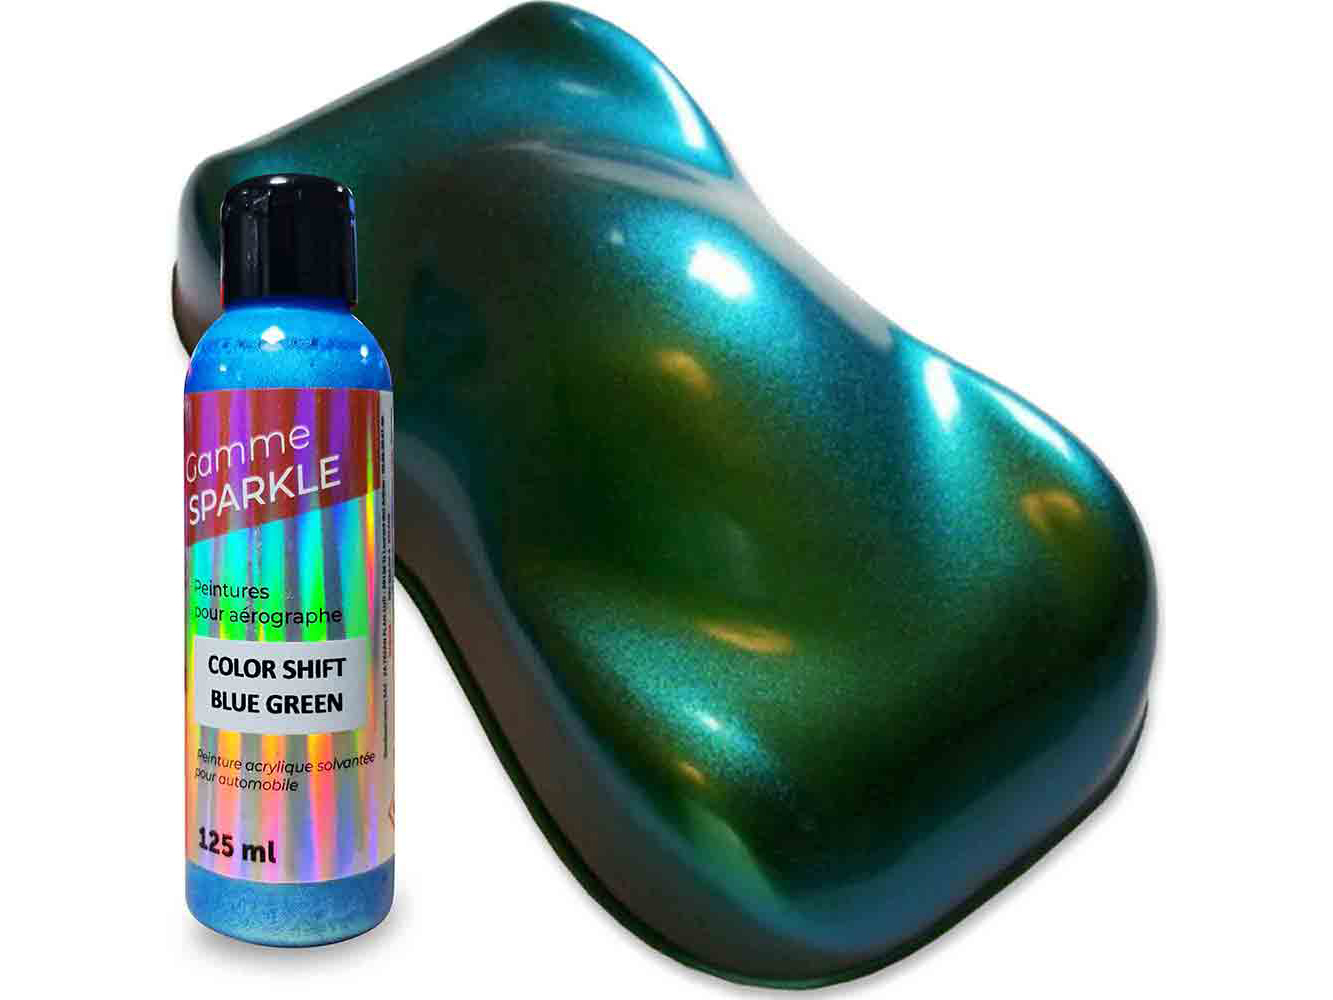 Stardust Airbrush Color SPARKLE COLOR SHIFT BLUE GREEN 125ml